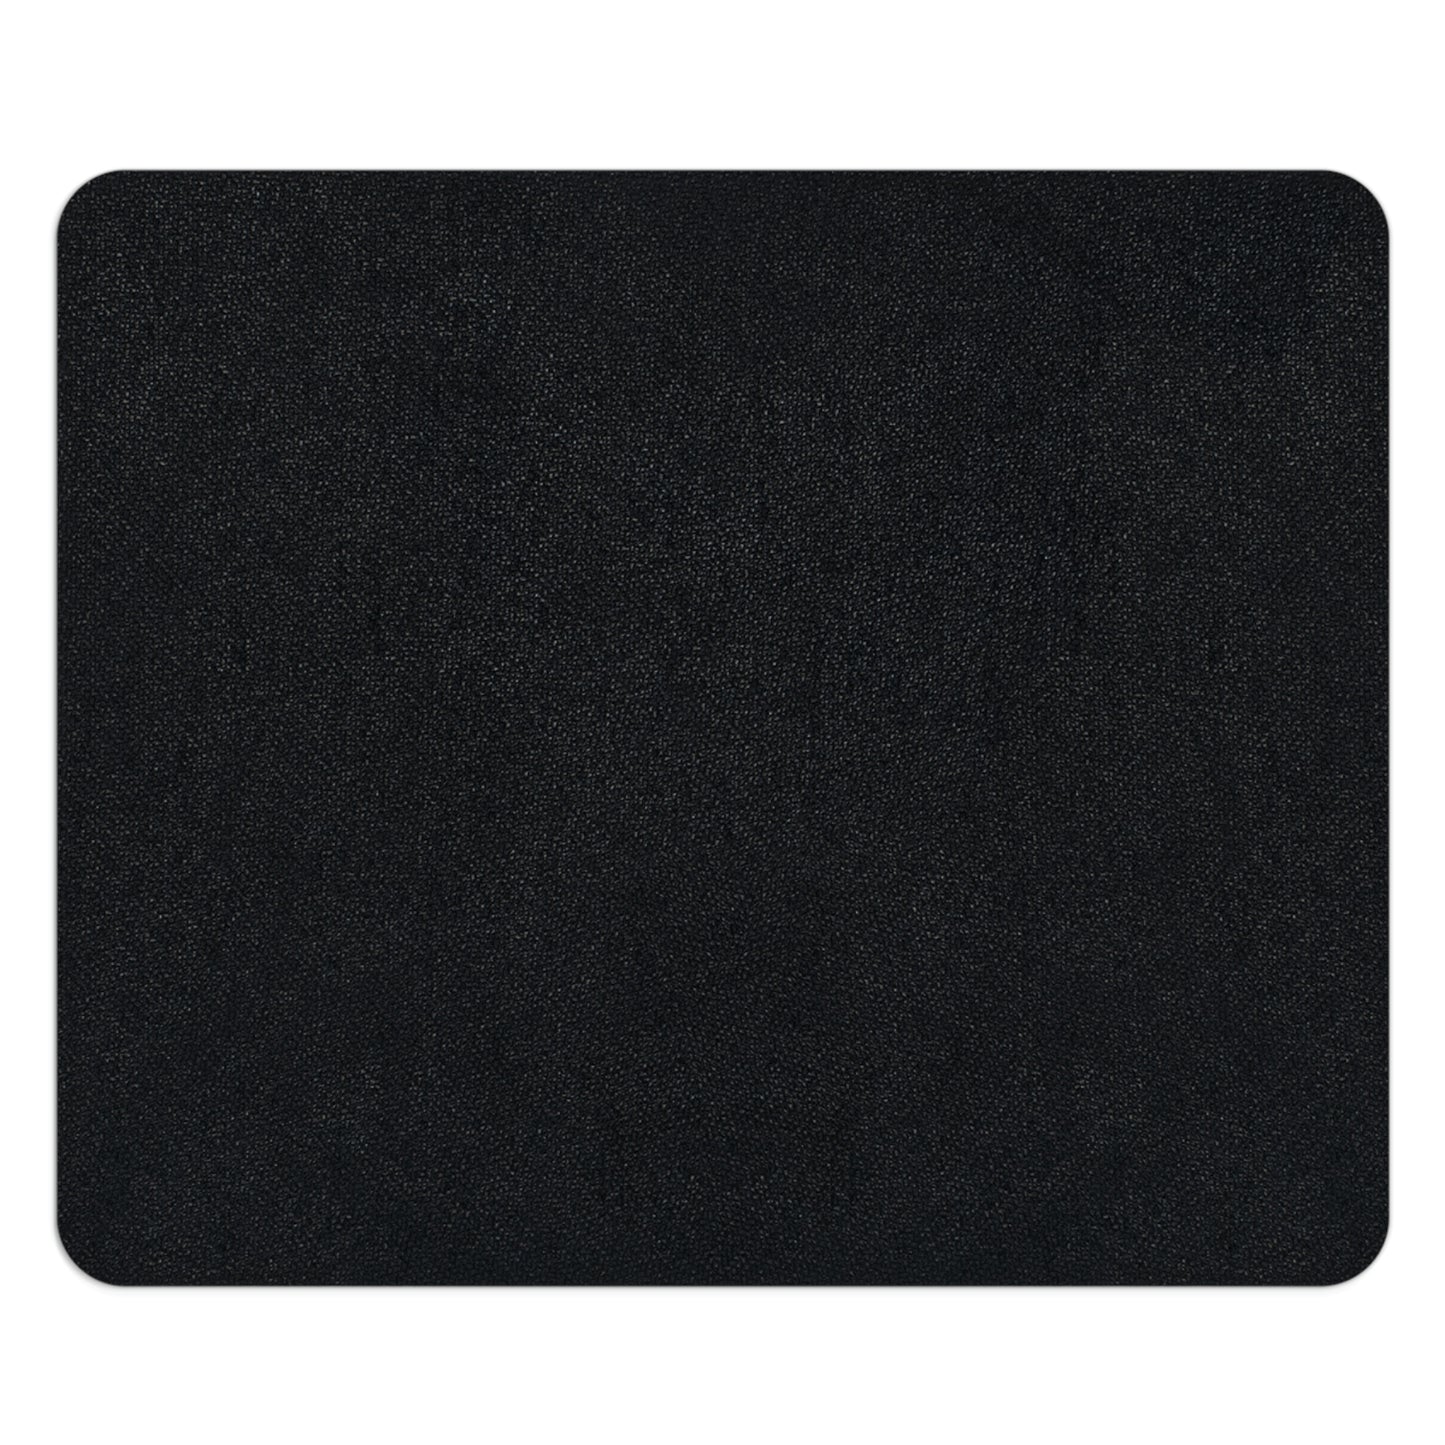 Laughing Dog Mouse Pad (2 Shapes)